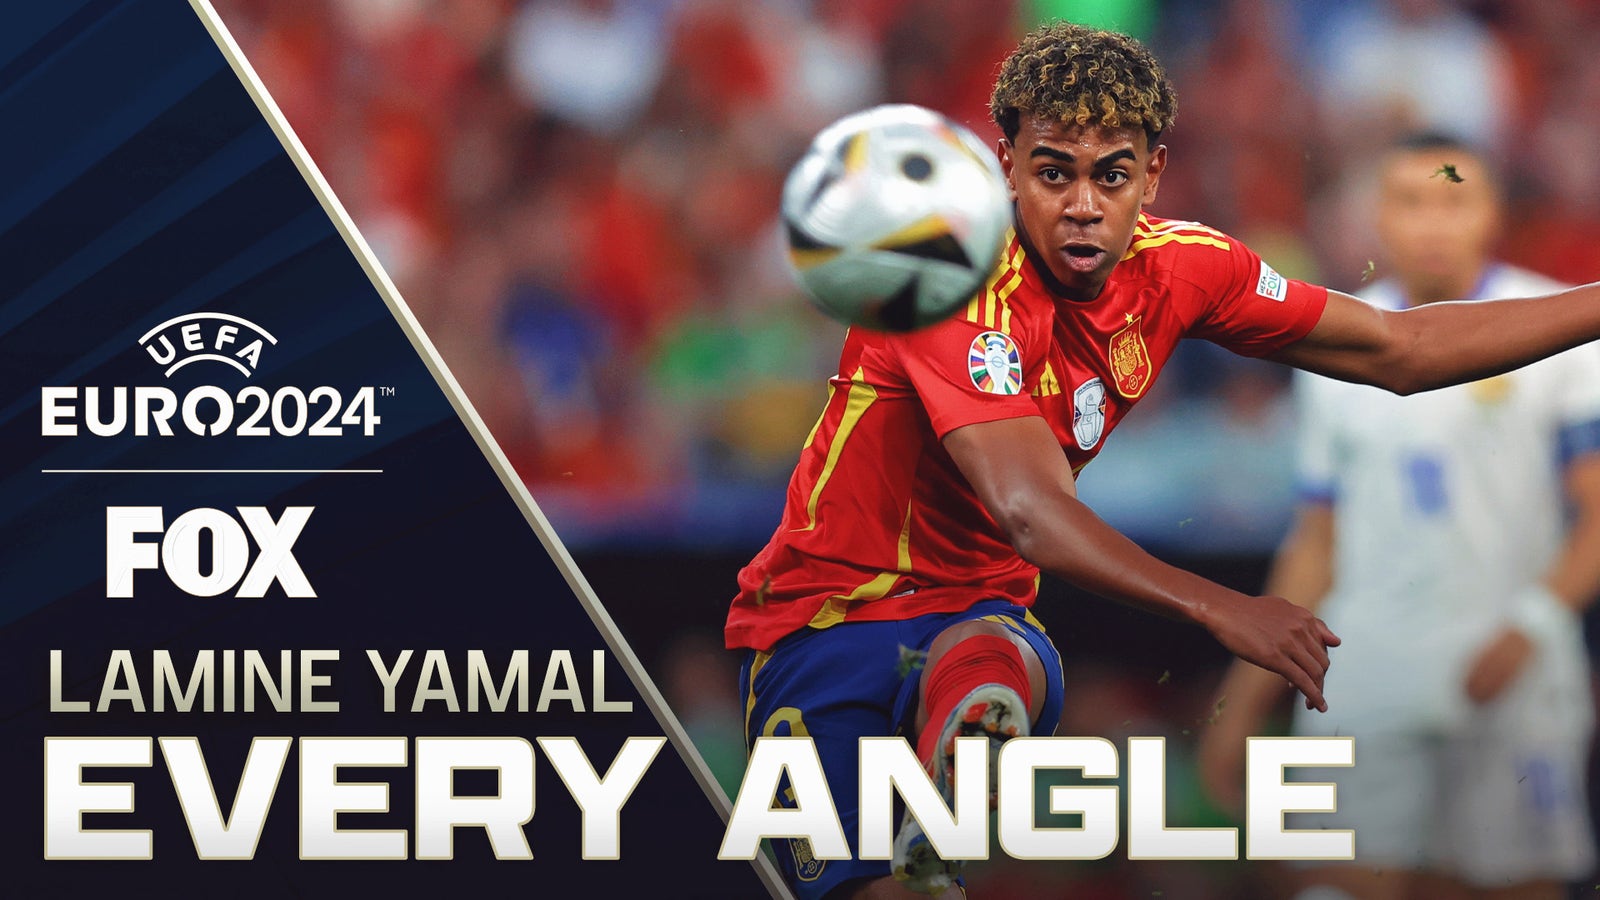 Lamine Yamal becomes youngest player to score in Euros history